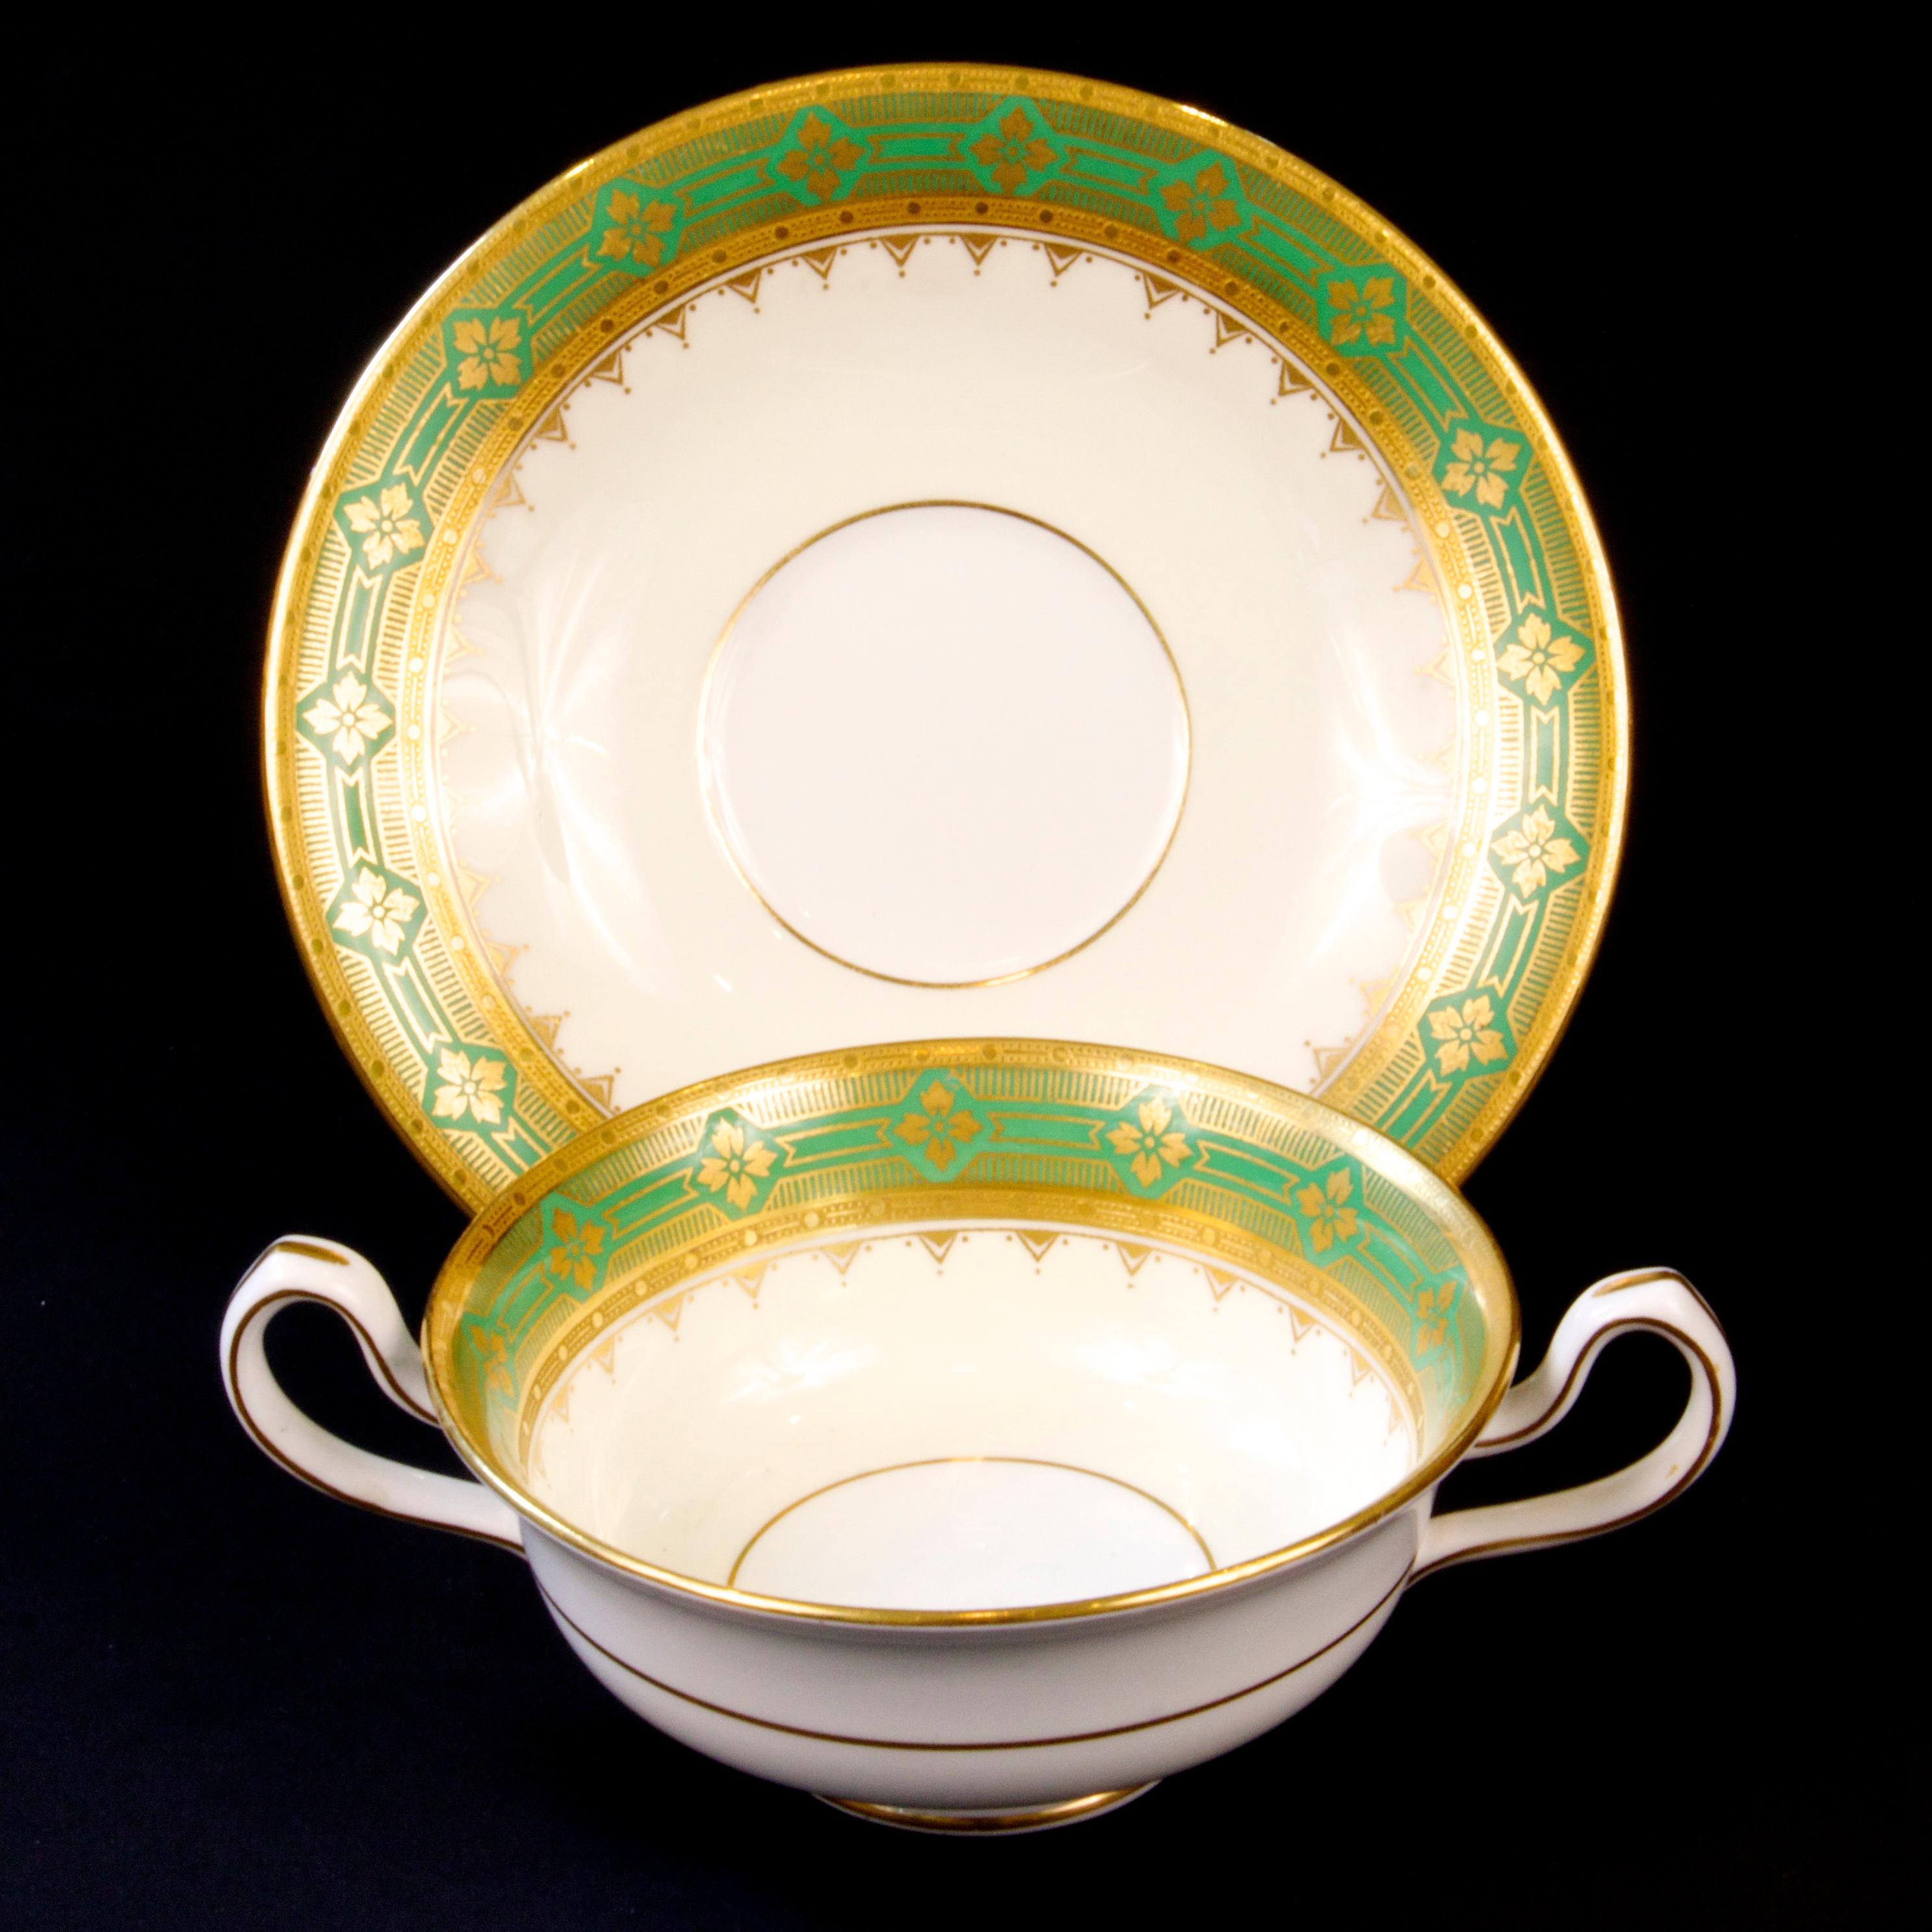 These 22-karat gold-encrusted cream soup or bullion cups from Minton, Stoke-on-Trent, England would make an elegant presentation at any dinner party. The design features gold quatrefoils motifs on green, finished by acid etched gold inner and outer